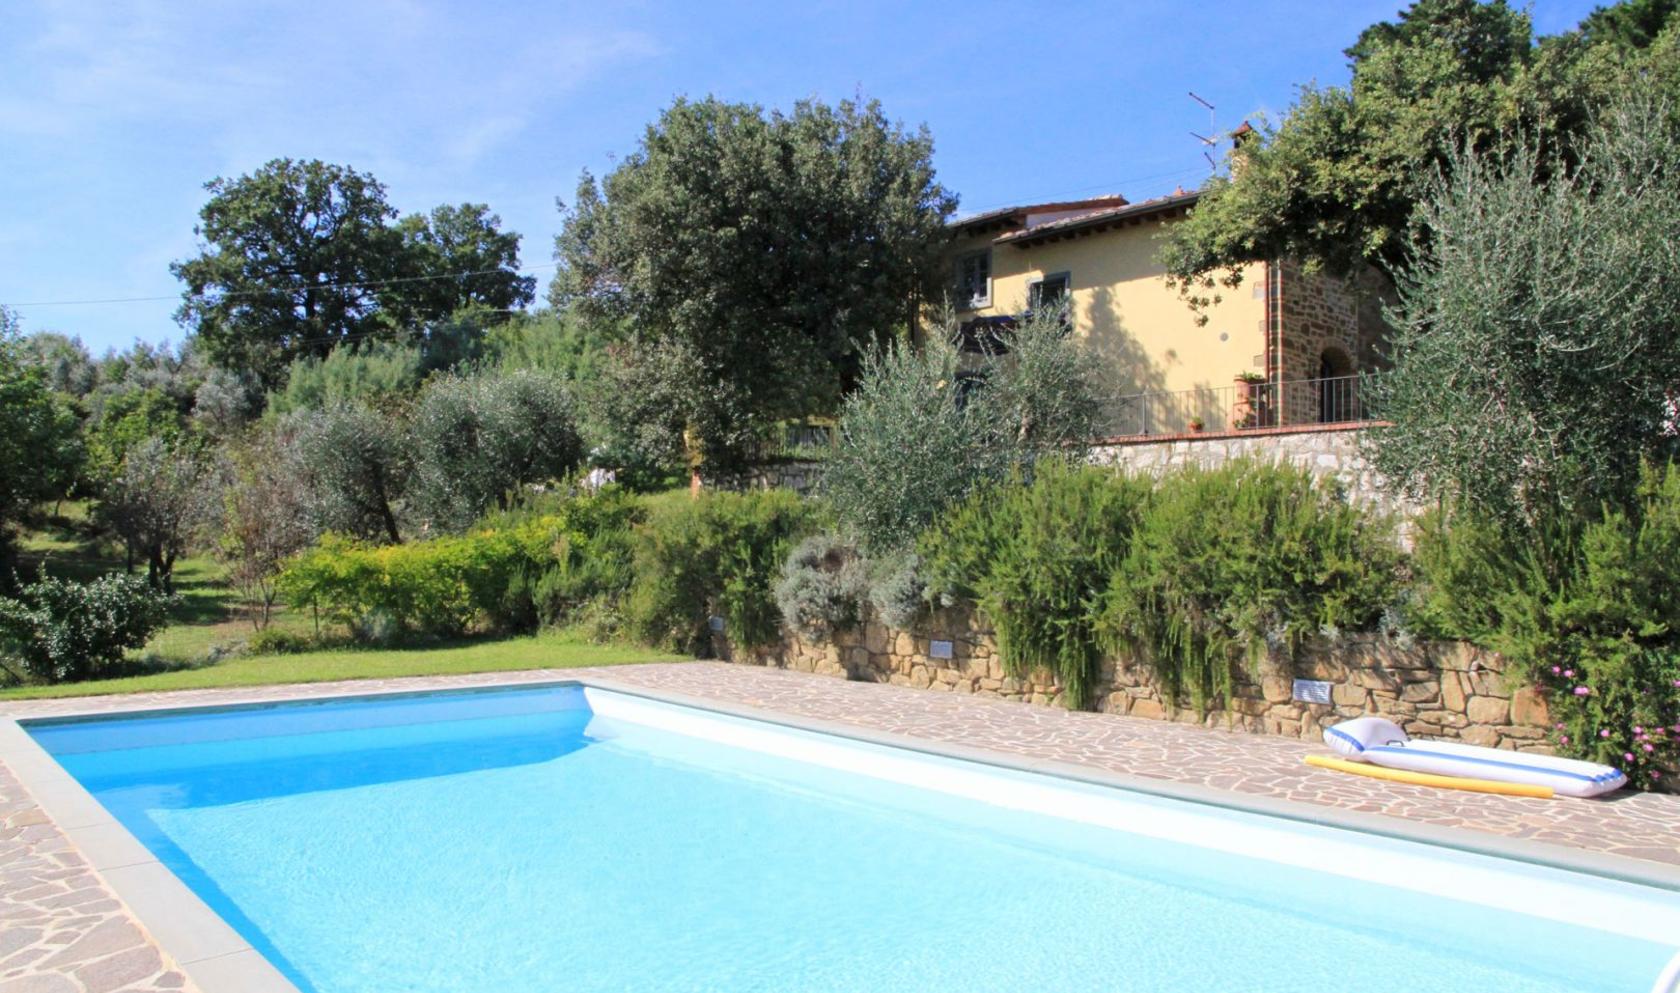 Toscana Immobiliare - Renovated stone farmhouse dating back to the end of the 19th century with swimming pool, a stone's throw from the village of Monte San Savino